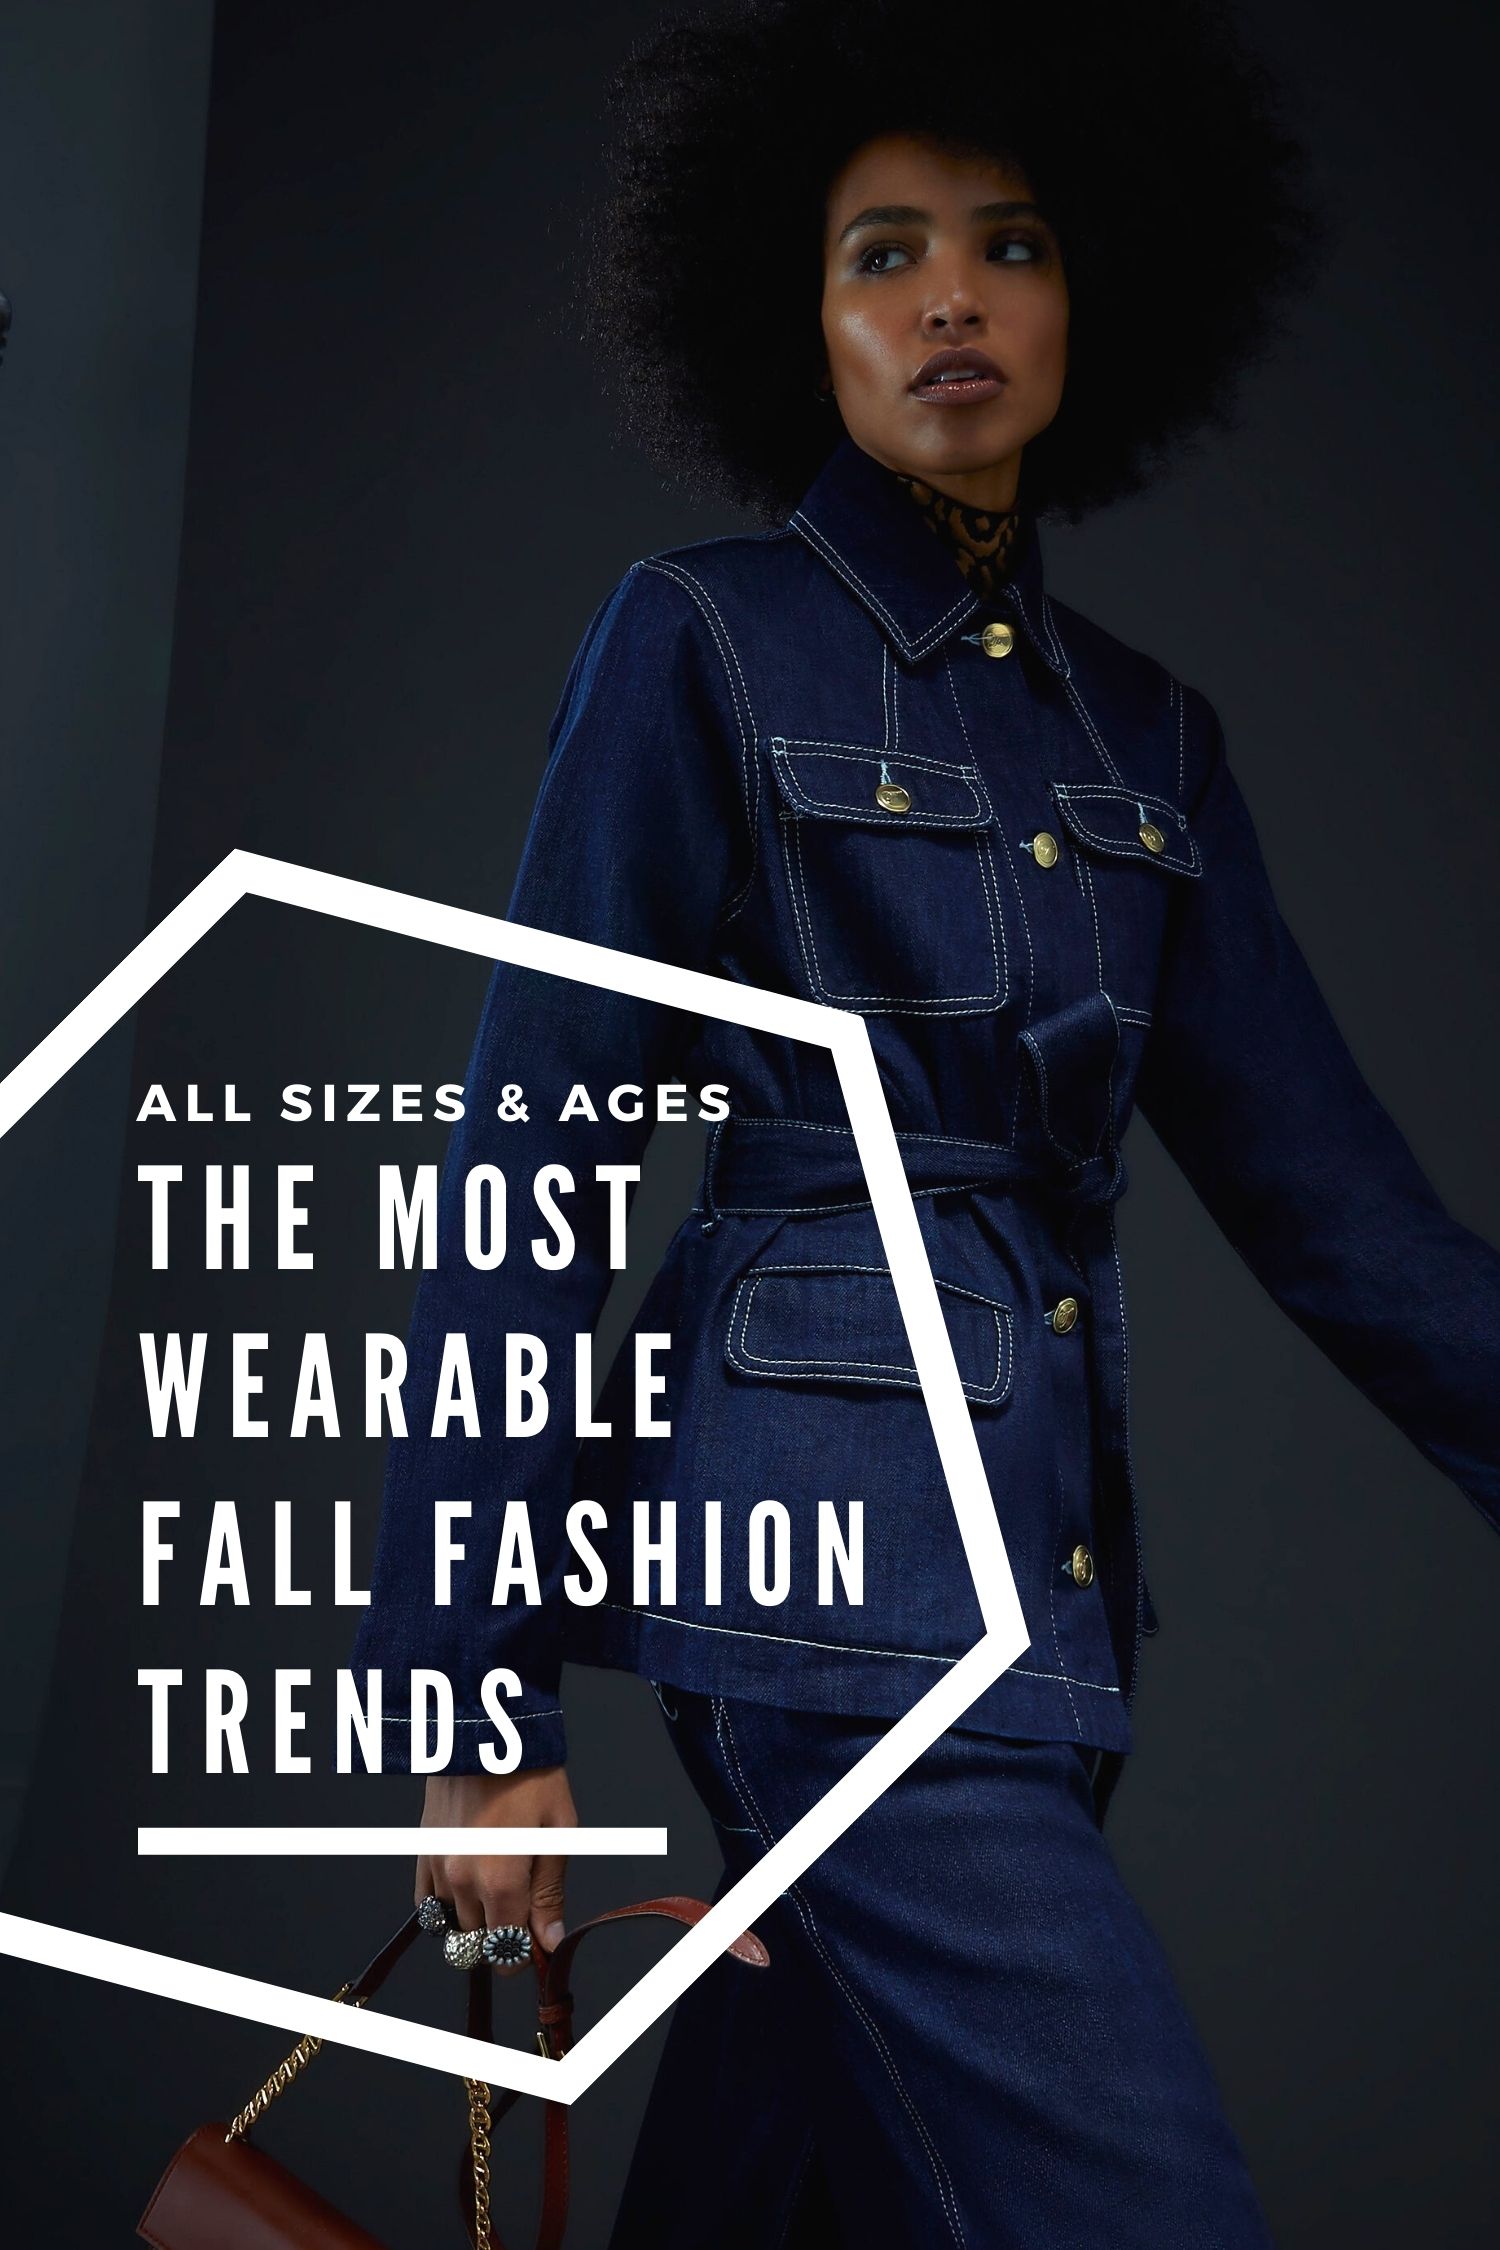 Fall Fashion Trends for Women Over 40: 2021 Edition